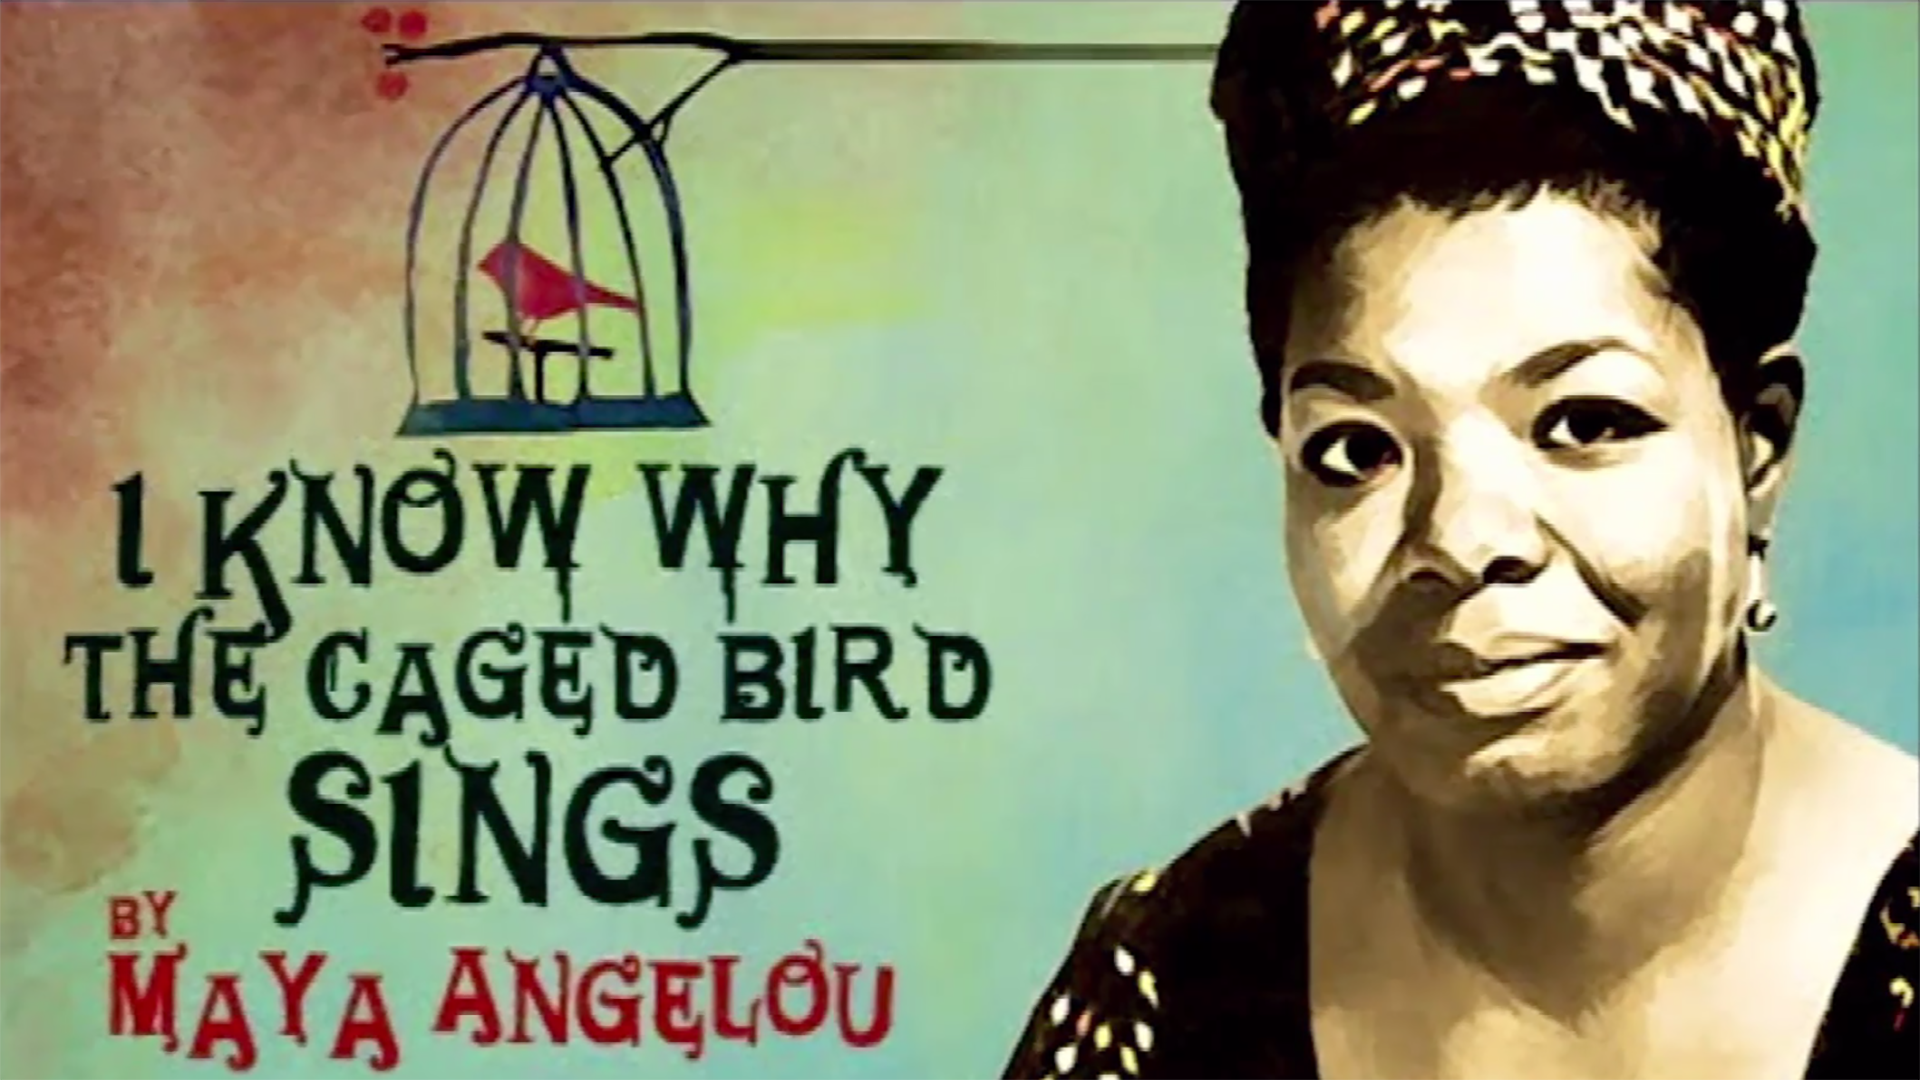 why did the caged bird sing poem